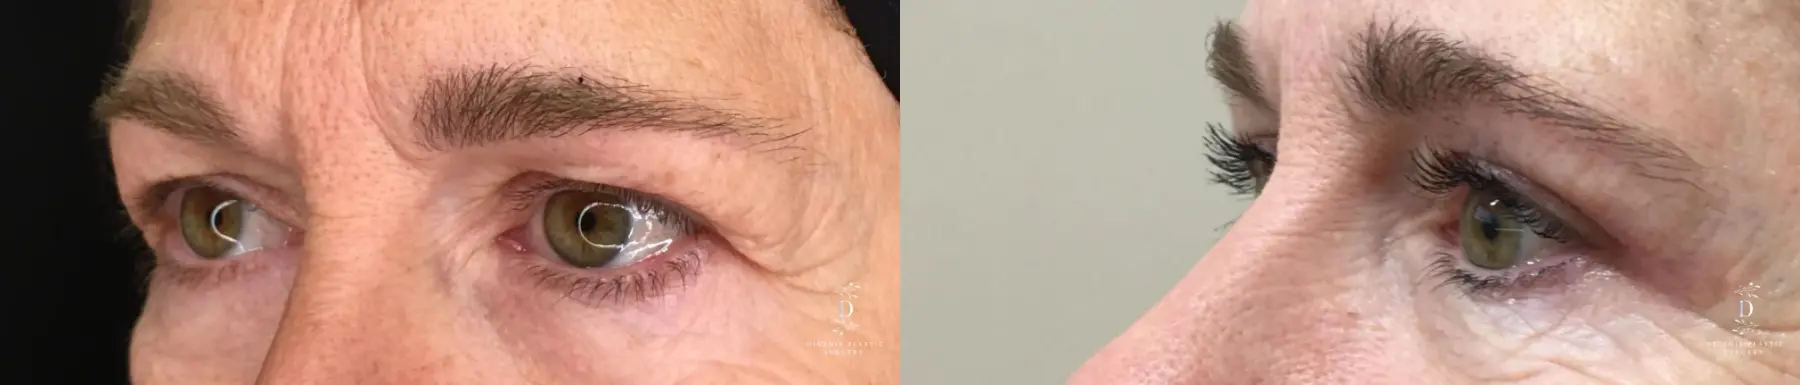 Eyelid Surgery: Patient 32 - Before and After 4